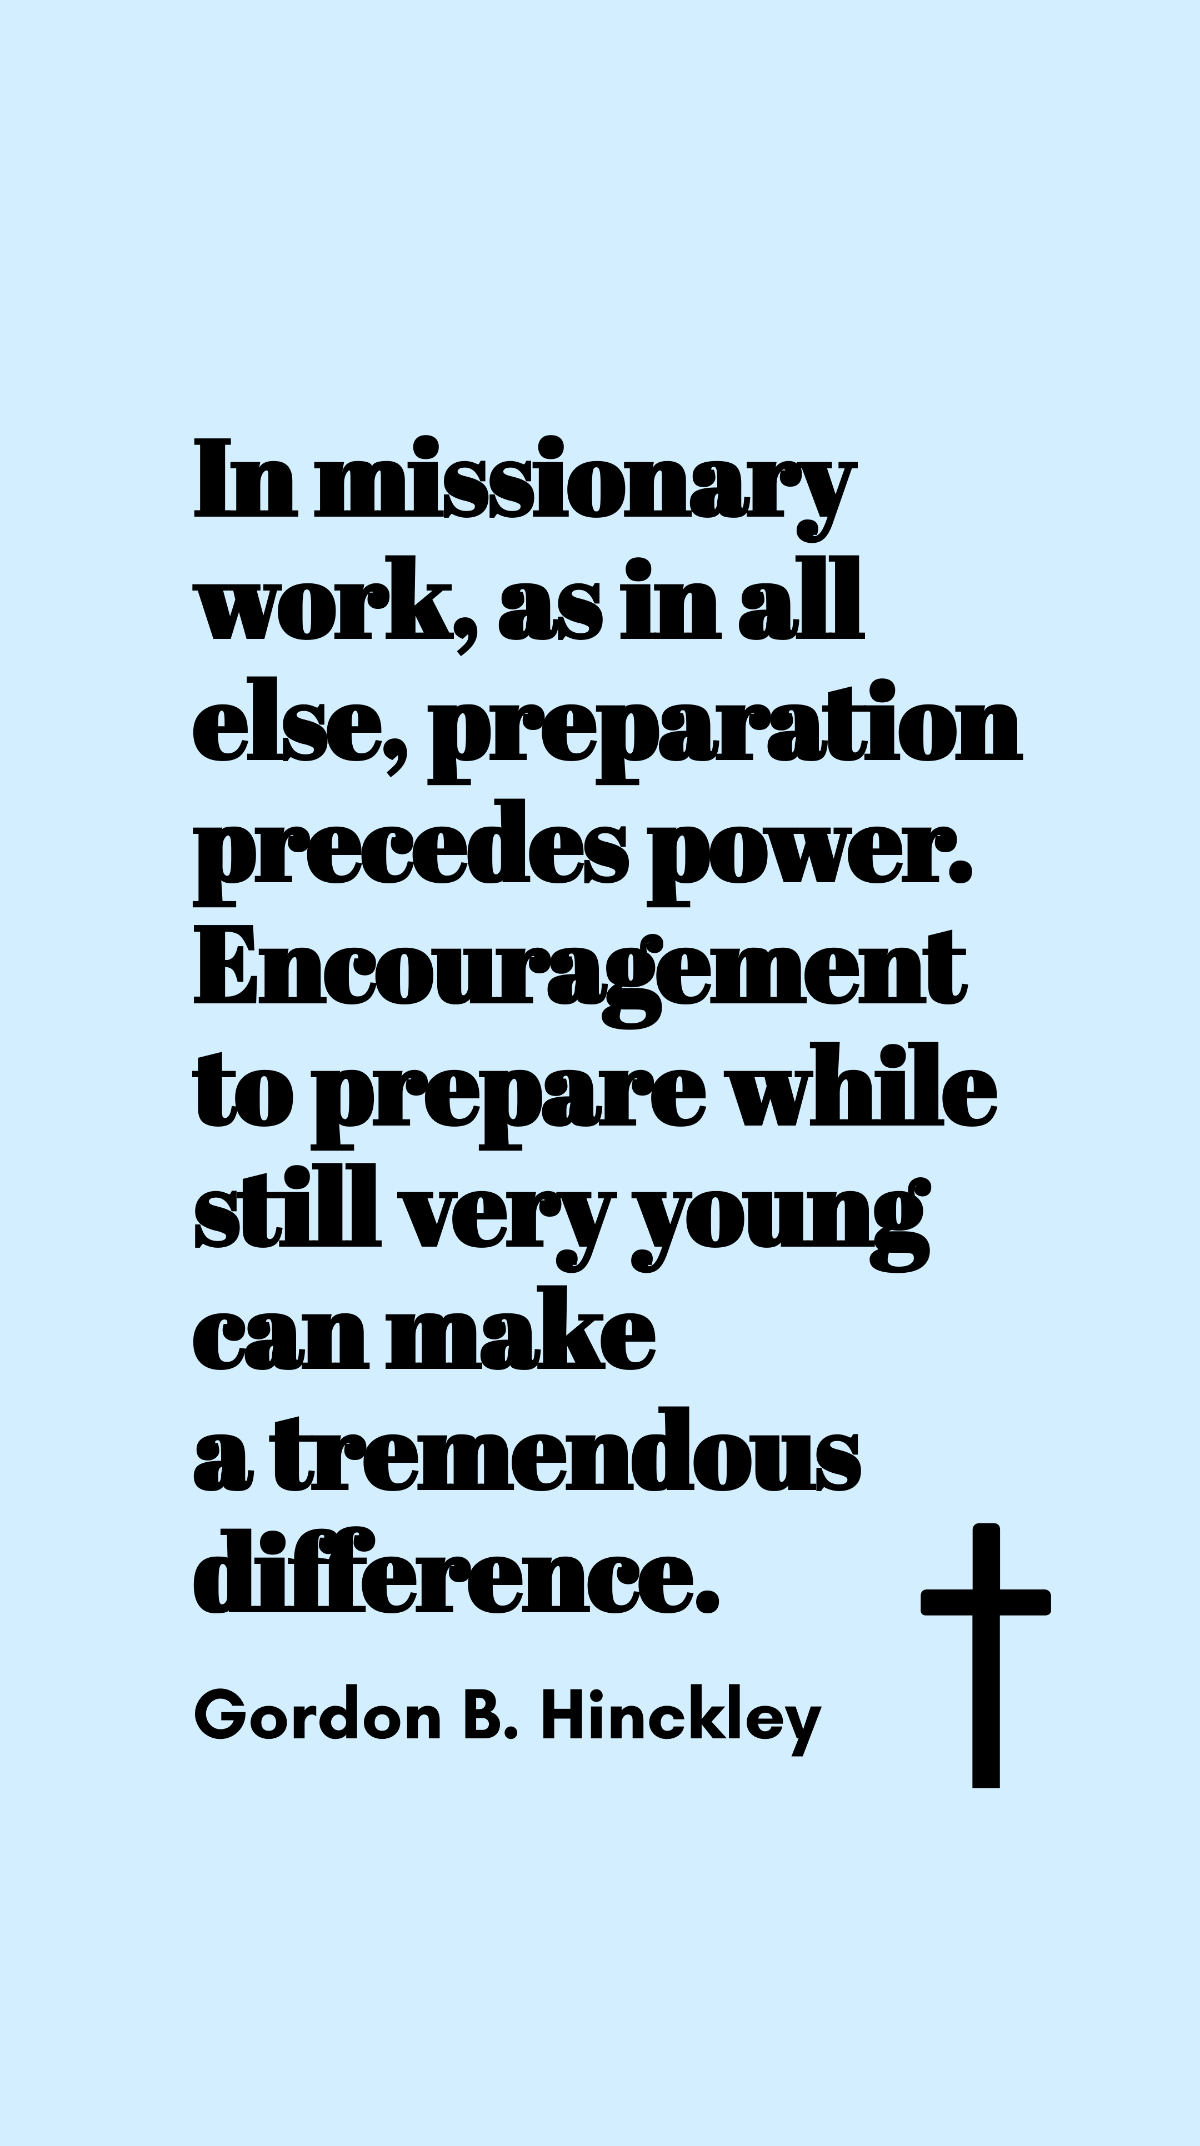 Gordon B. Hinckley - In missionary work, as in all else, preparation precedes power. Encouragement to prepare while still very young can make a tremendous difference. Template